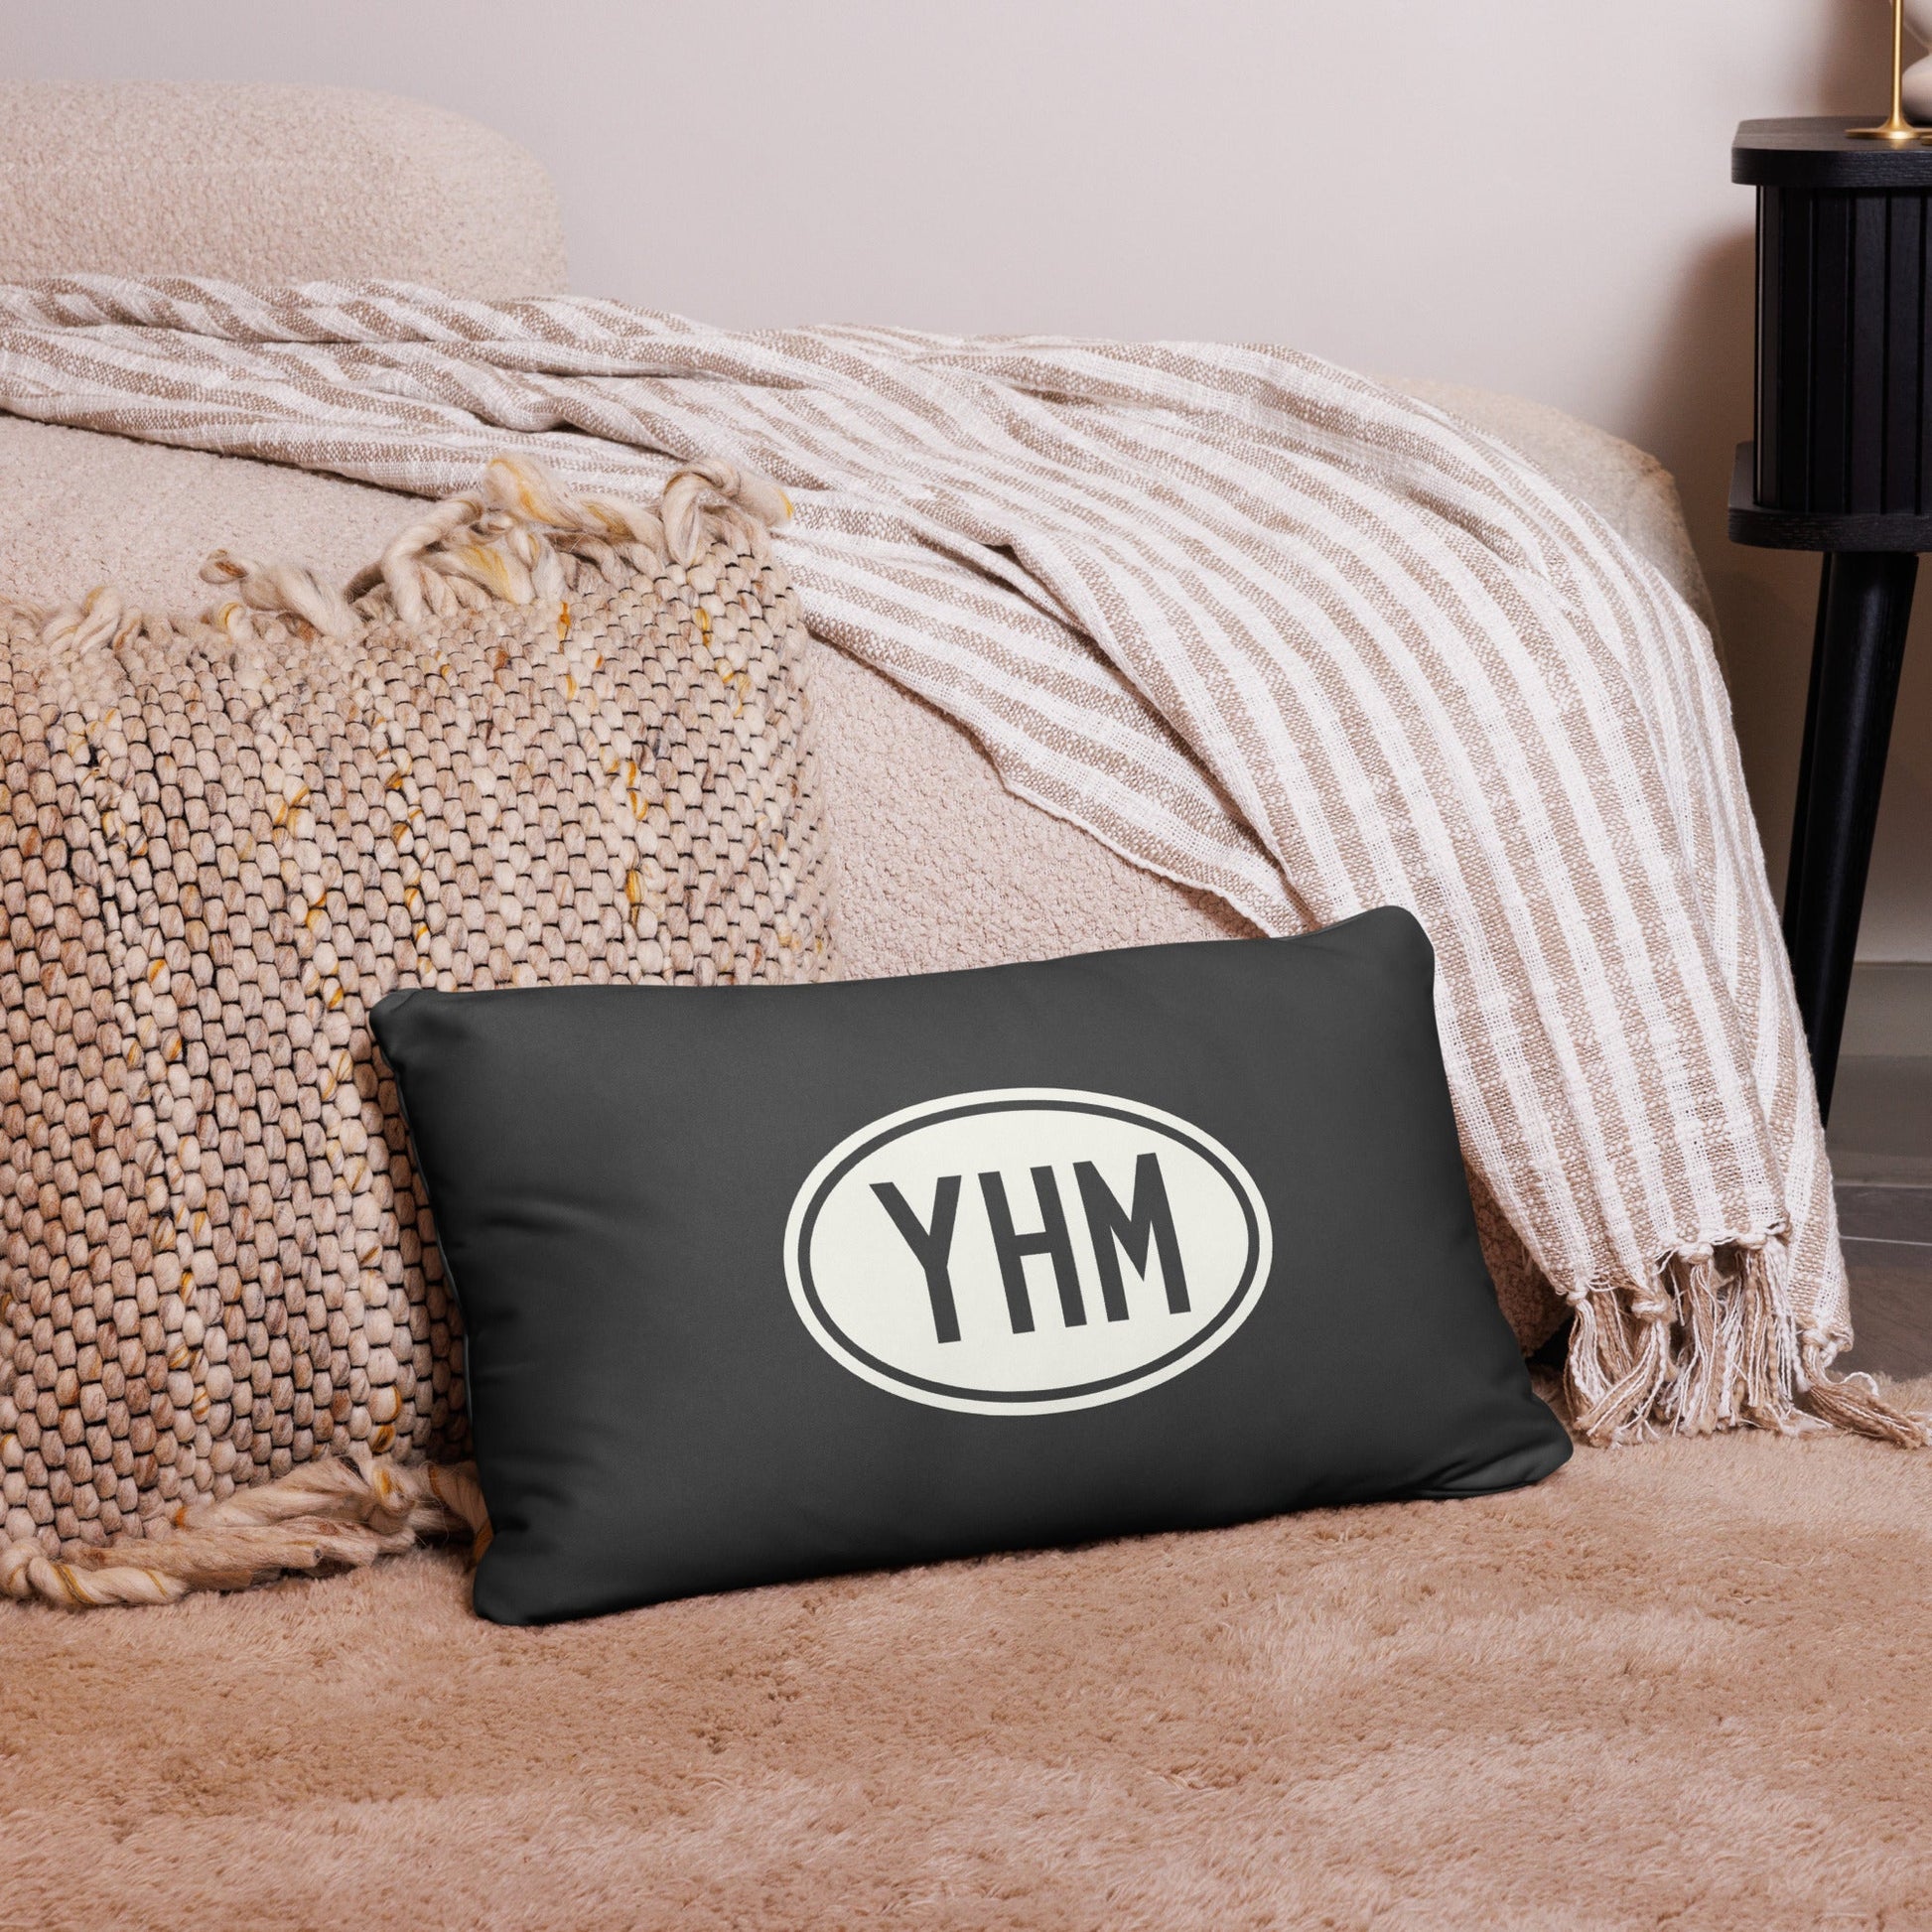 Unique Travel Gift Throw Pillow - White Oval • CMH Columbus • YHM Designs - Image 05